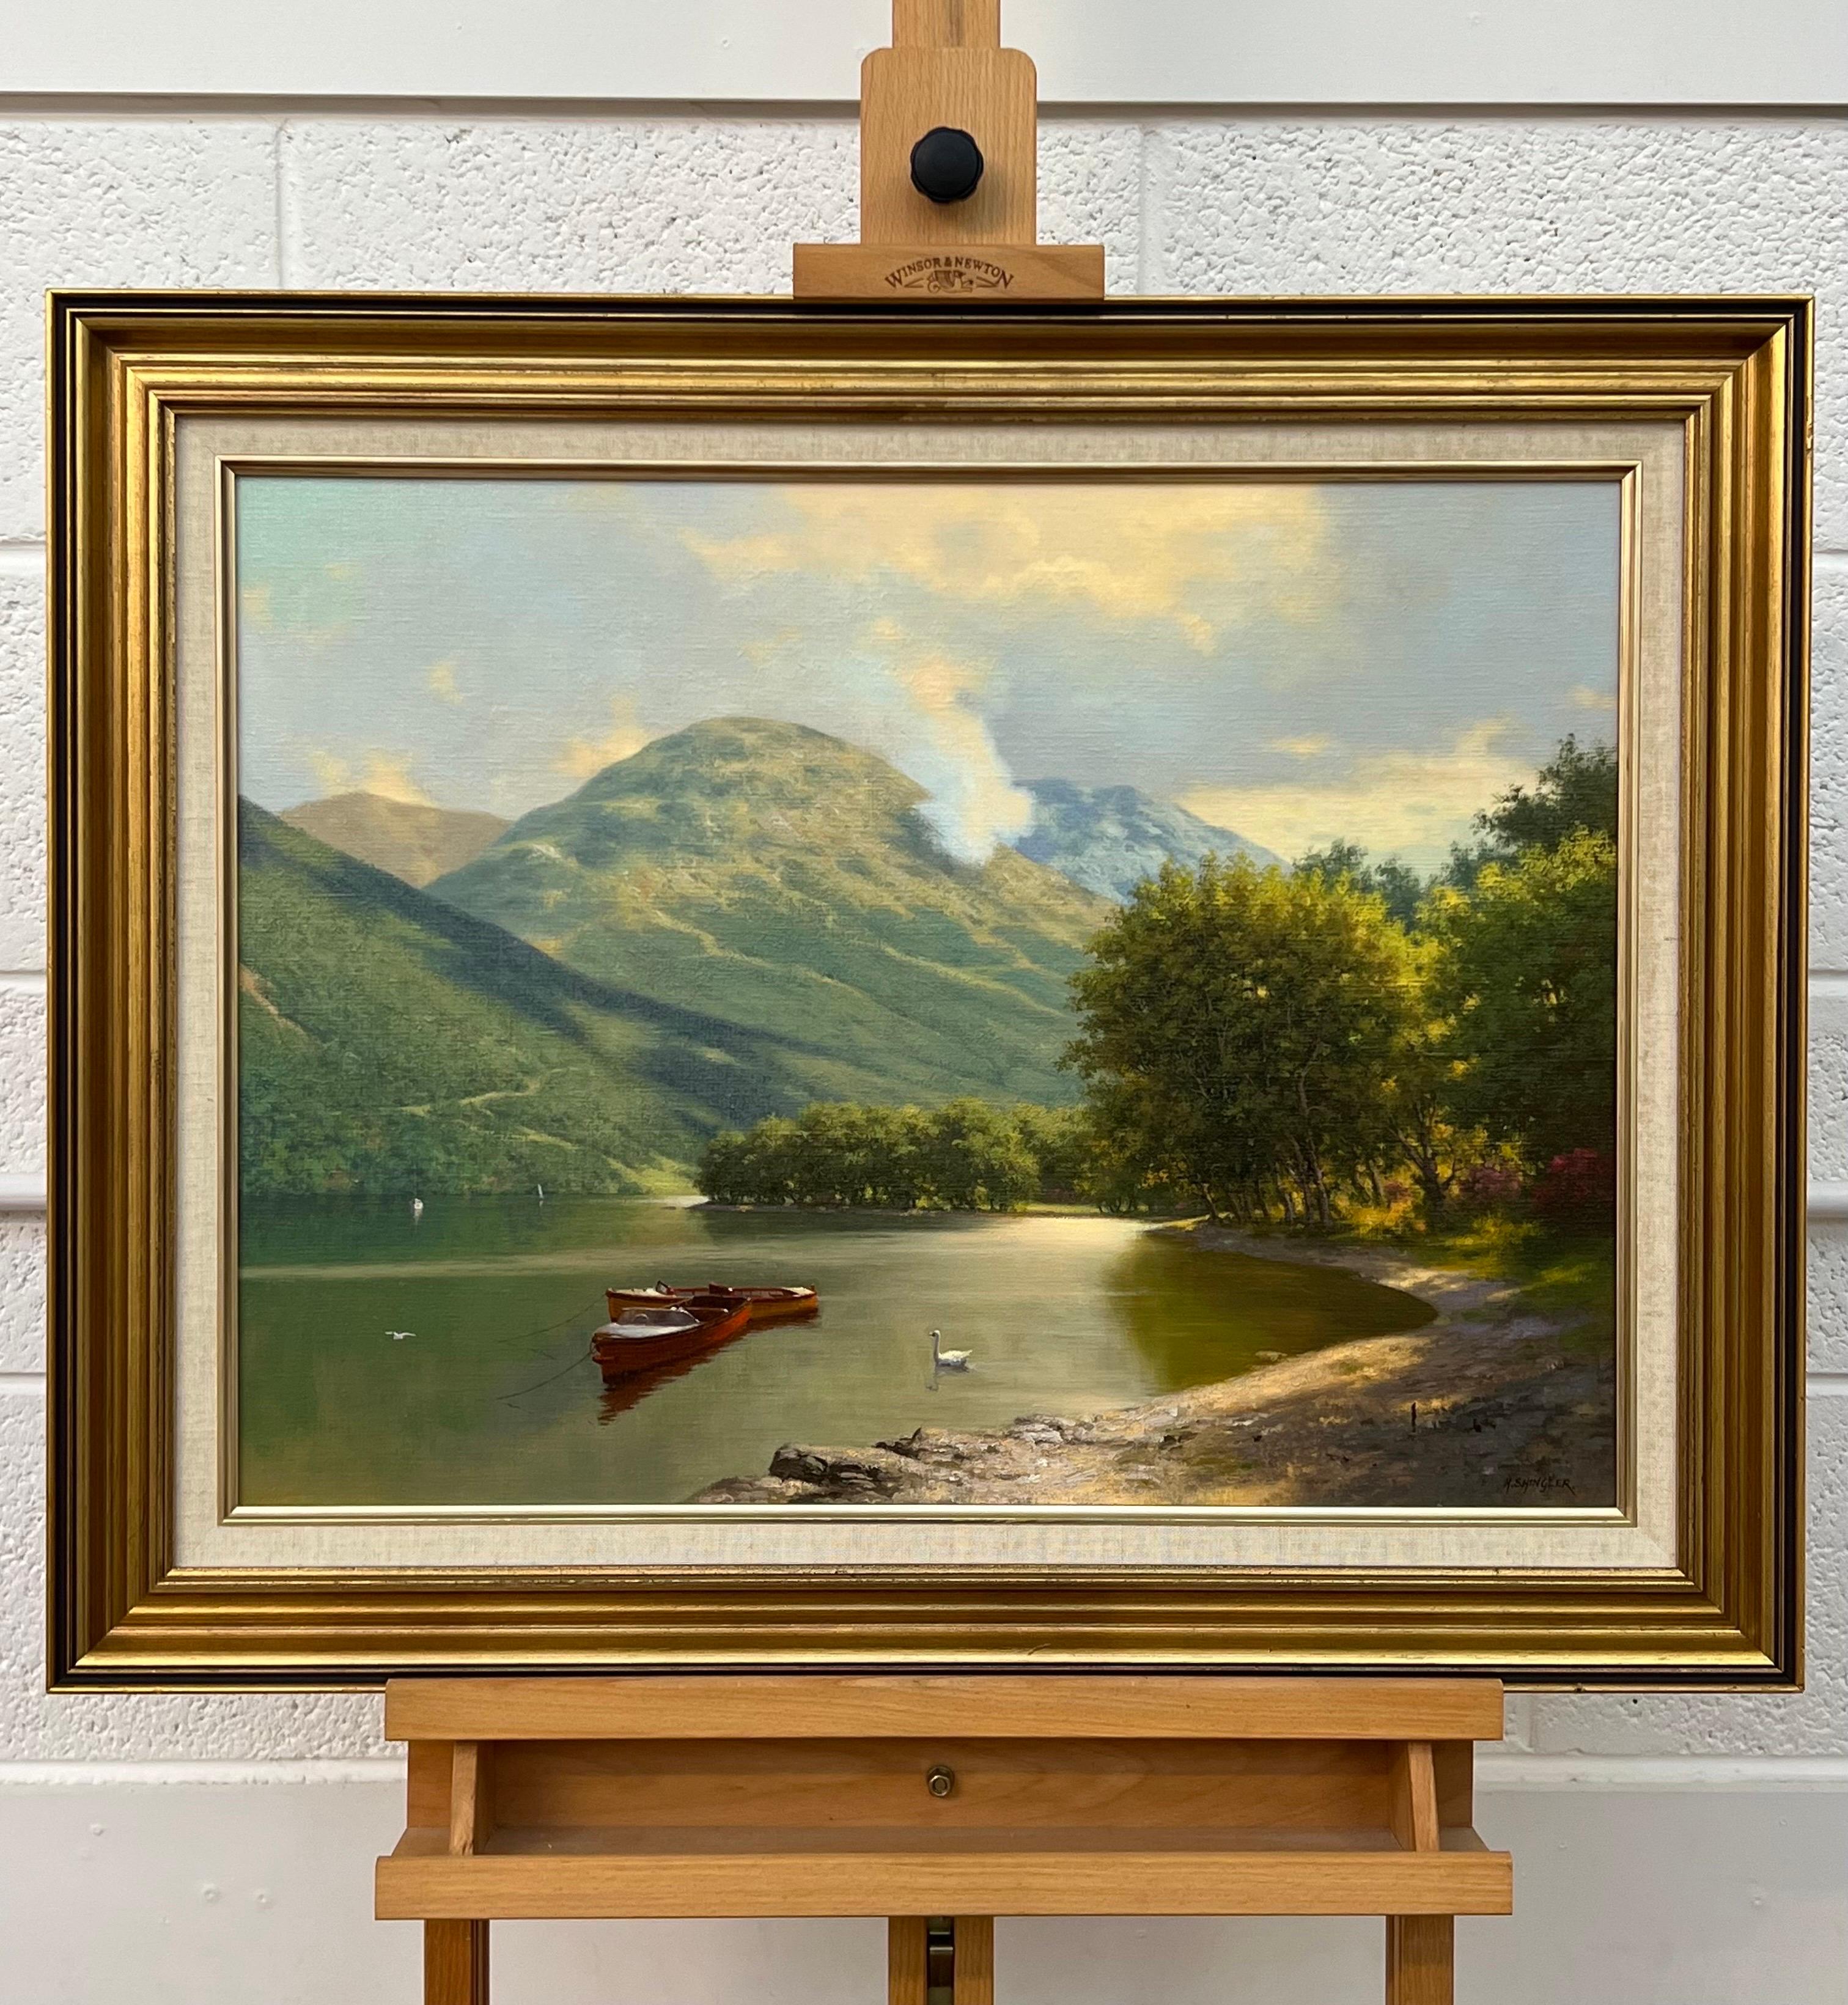 Tranquil Lake Scene with Boats & Swan in the Mountains of the Scottish Highlands by 20th Century British Landscape Artist, Howard Shingler.

Art measures 24 x 18 inches
Frame measures 30 x 24 inches

This painting depicts a tranquil lakeside scene